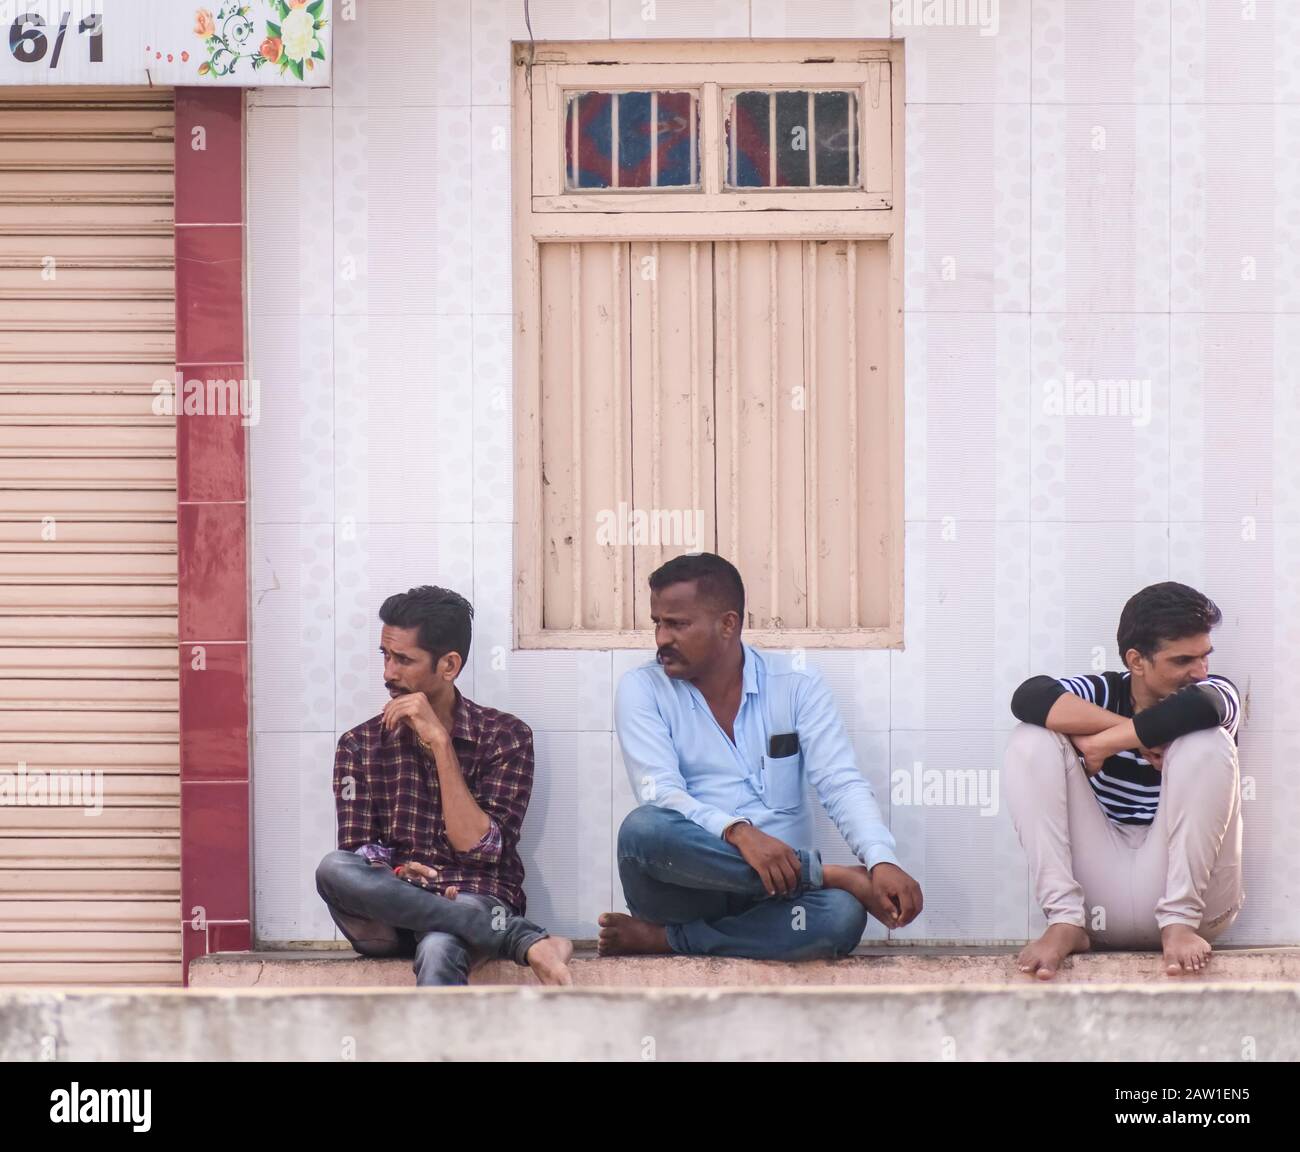 Diu, India - December 2018: Three men sit on a shelf outside the shuttered window of a shop on the streets of Diu. Stock Photo